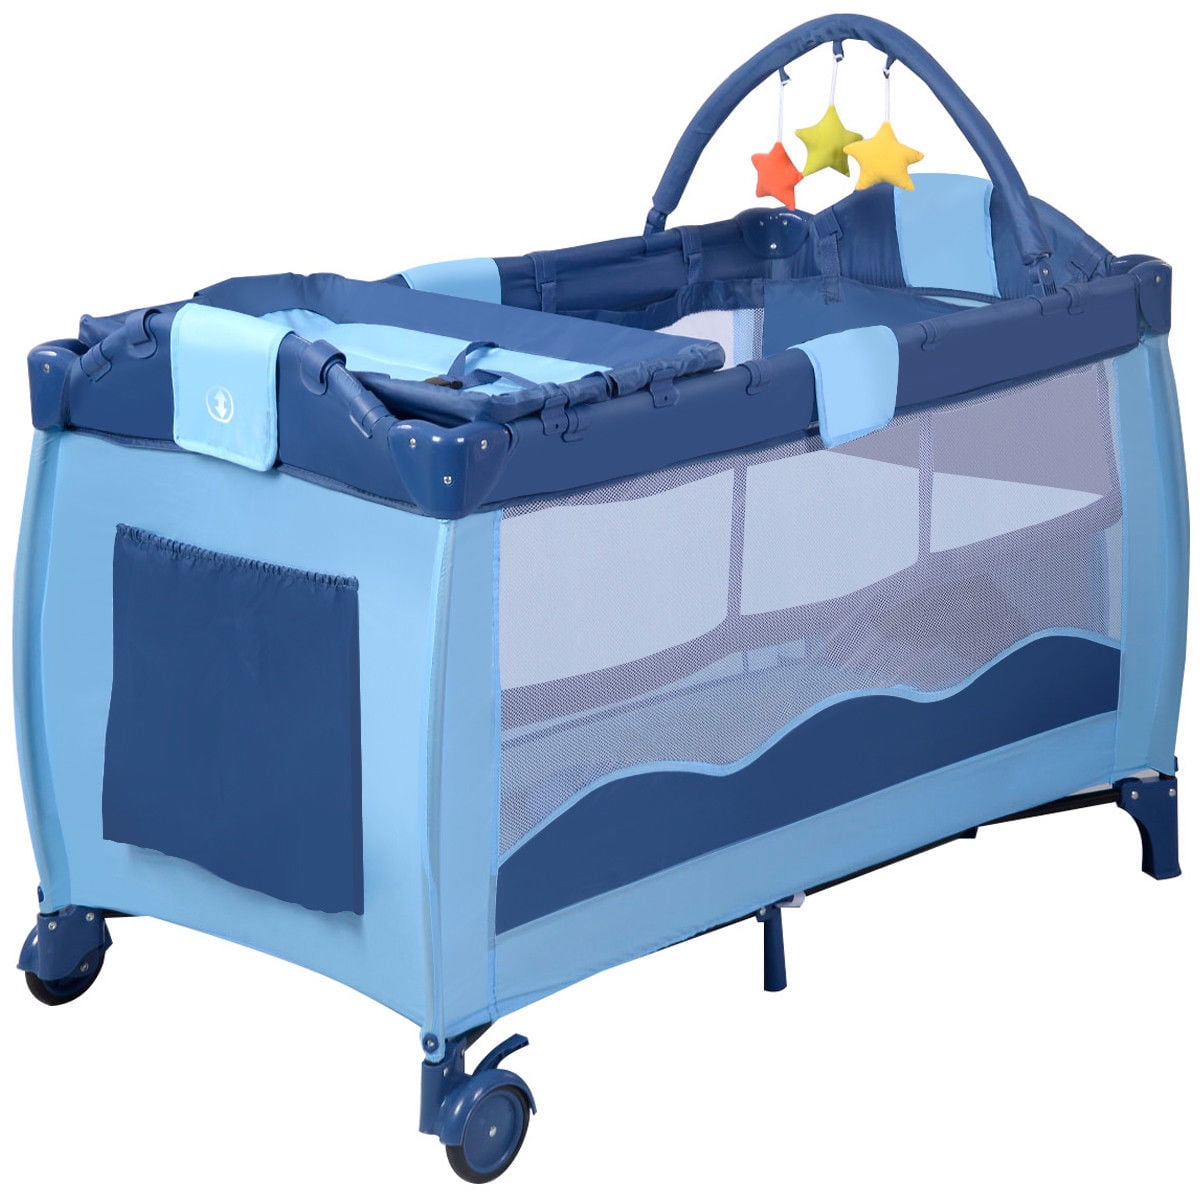 Bed Play Pen Child Bassinet Playpen Entryway Blue with Mat 2 in 1 COSTWAY Portable Infant Baby Travel Cot